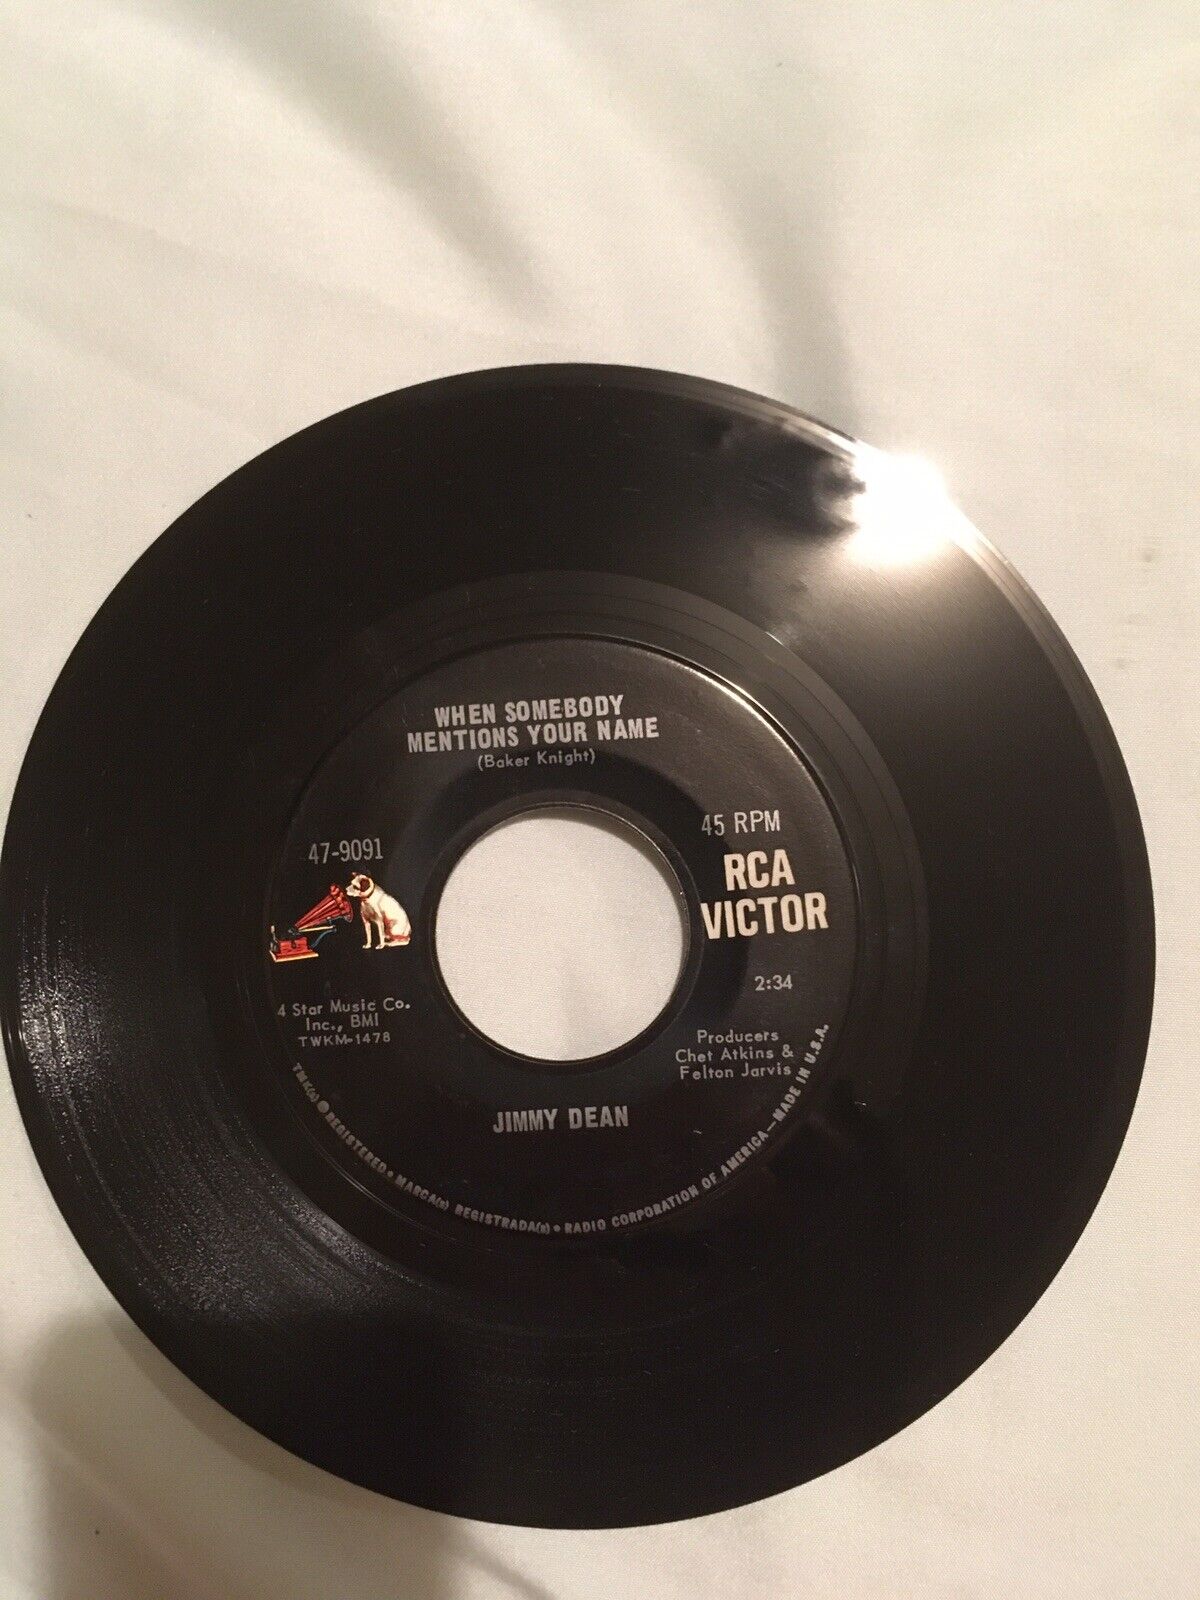 Jimmy Dean - Sweet Misery / When Somebody Mentions Your Name 45 Vinyl